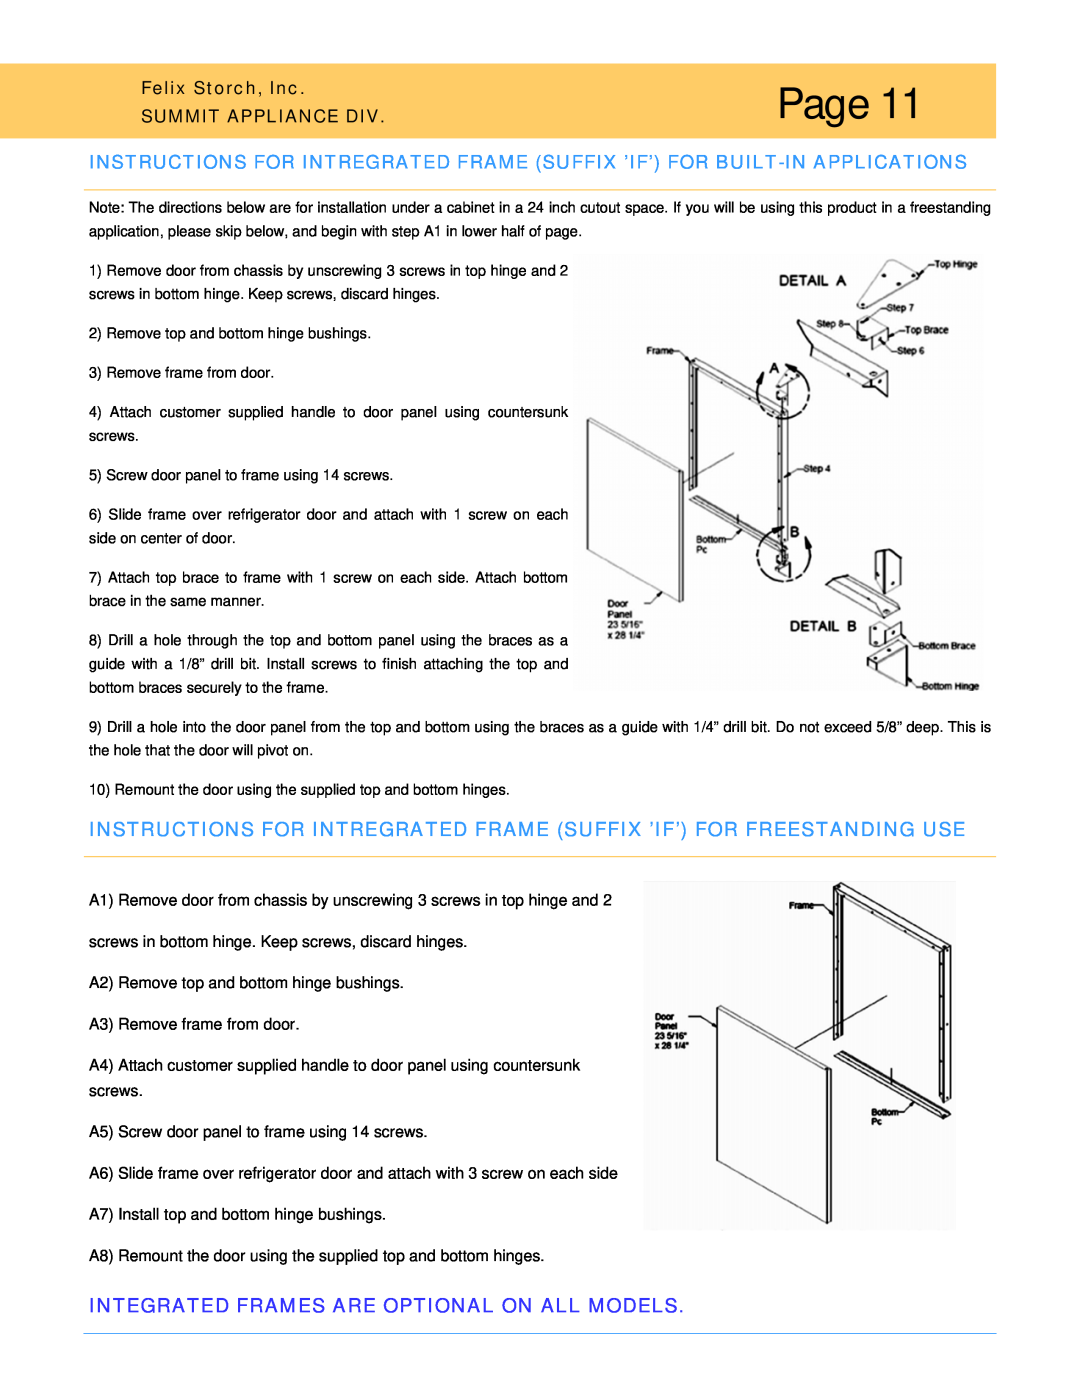 Summit SWC-6G, SCR-600, FF8, ALF-620, AL-750 Page, Instructions For Intregrated Frame Suffix ’If’ For Freestanding Use 